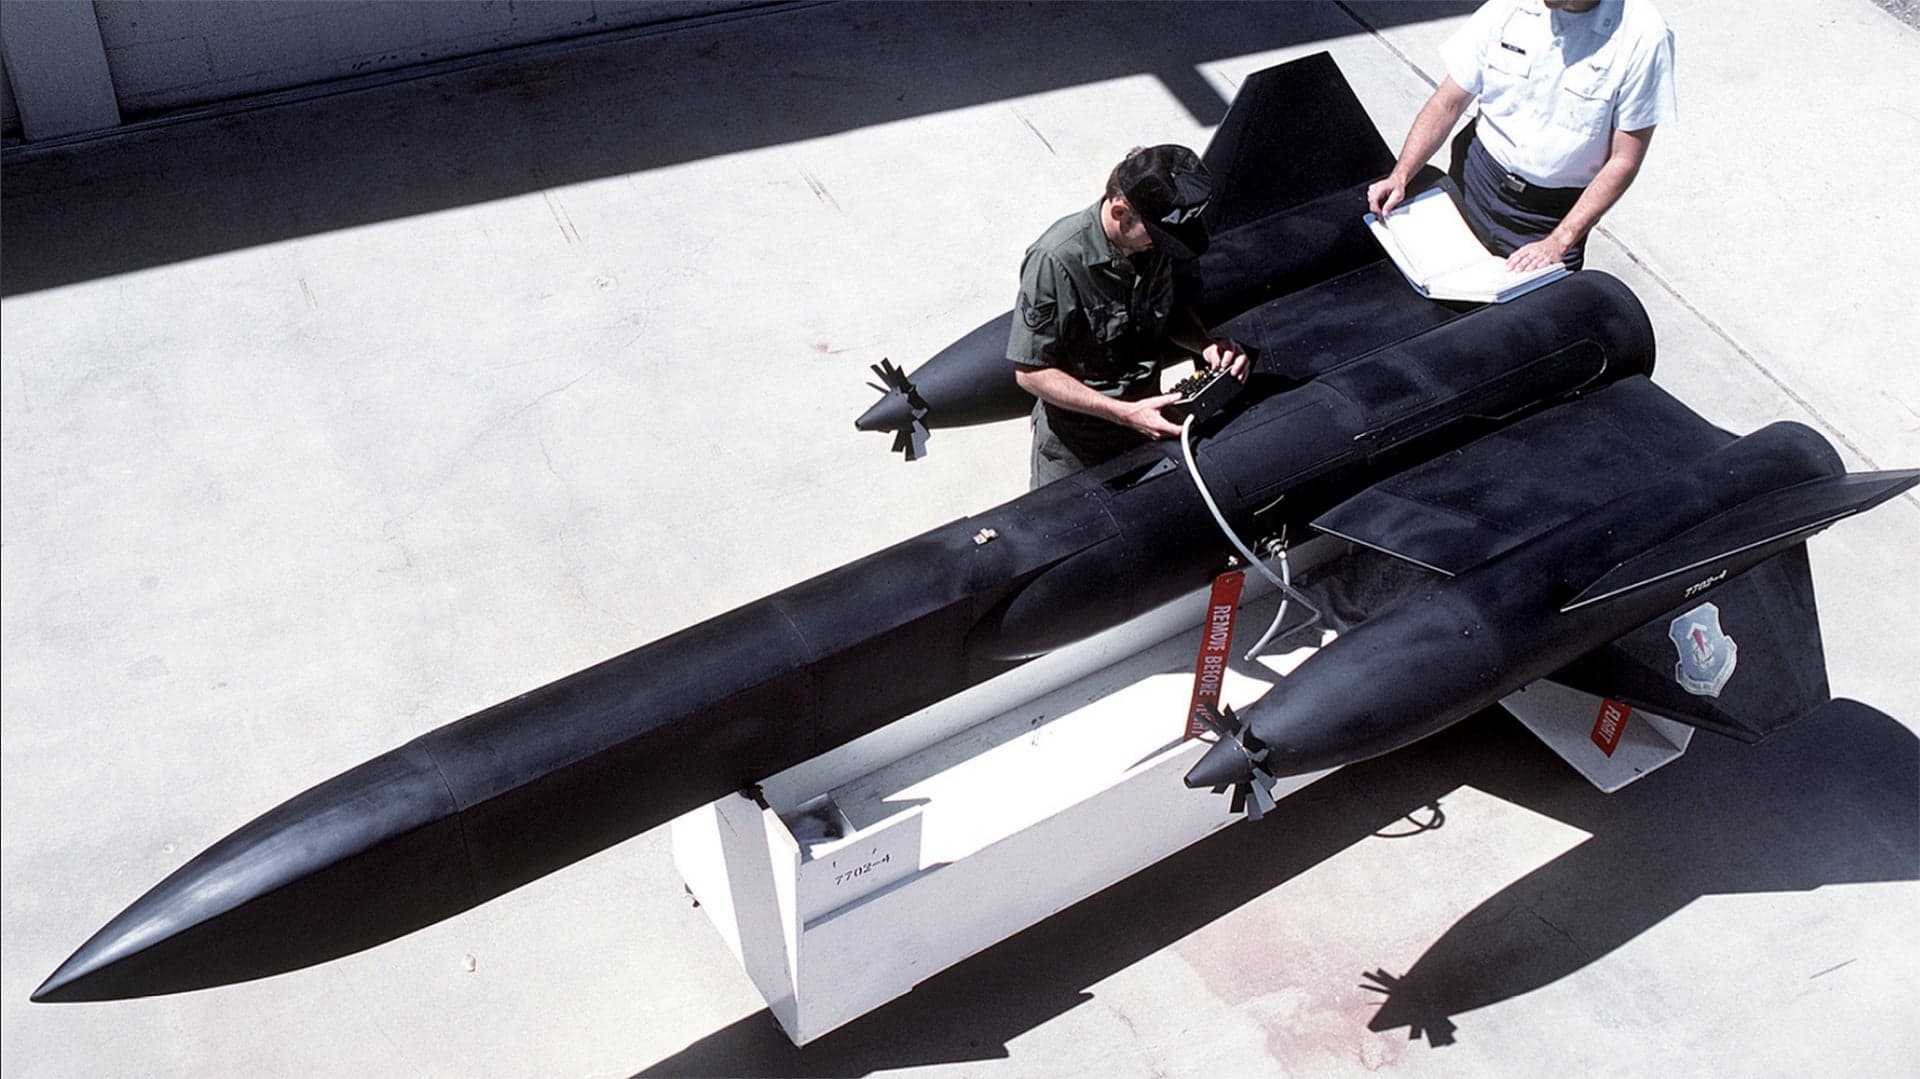 Help Us Identify This Mysterious SR-71-Looking “Tow Target”